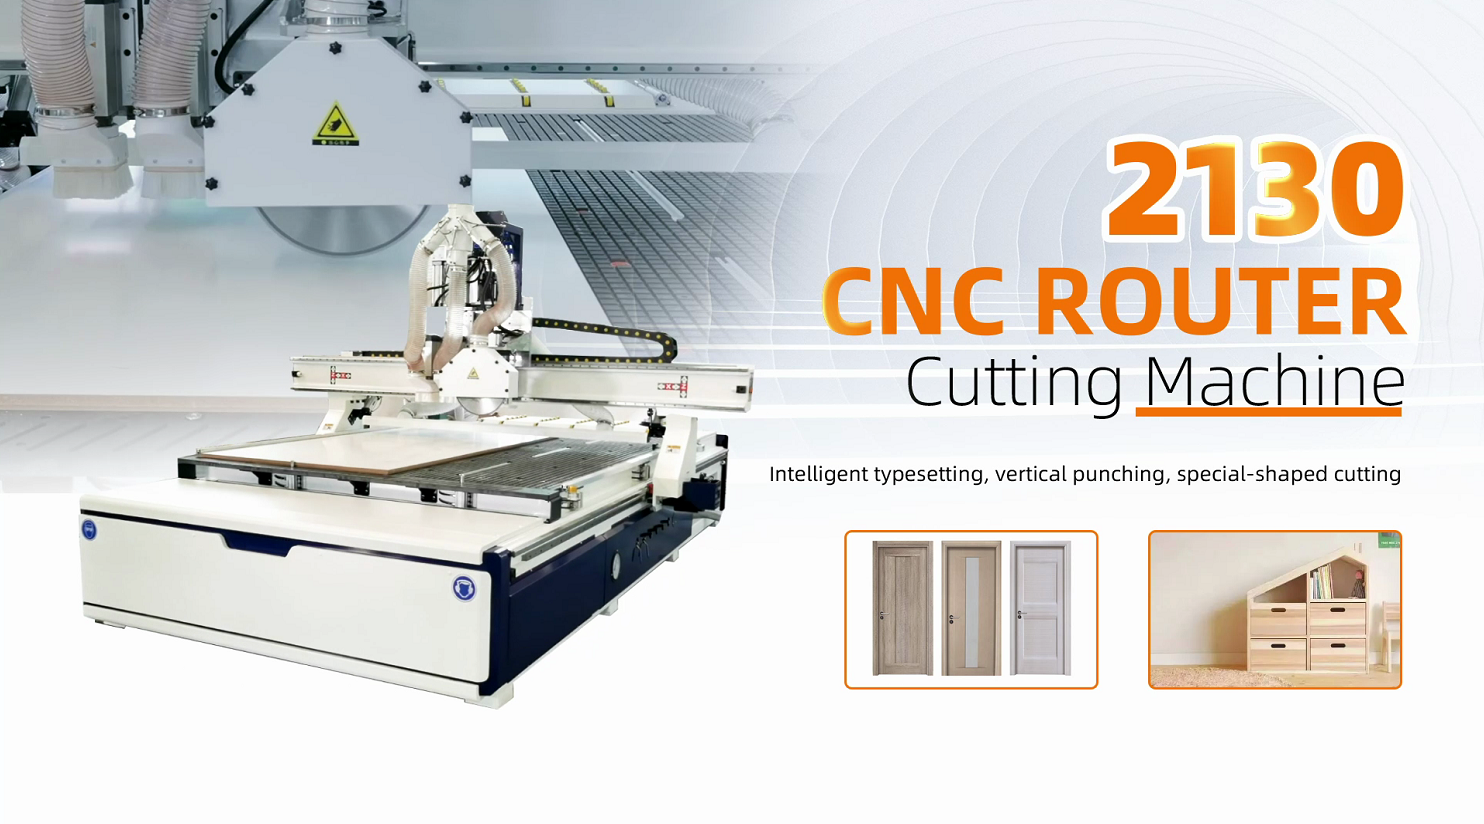 Leapion CNC router 2130 cutting machines